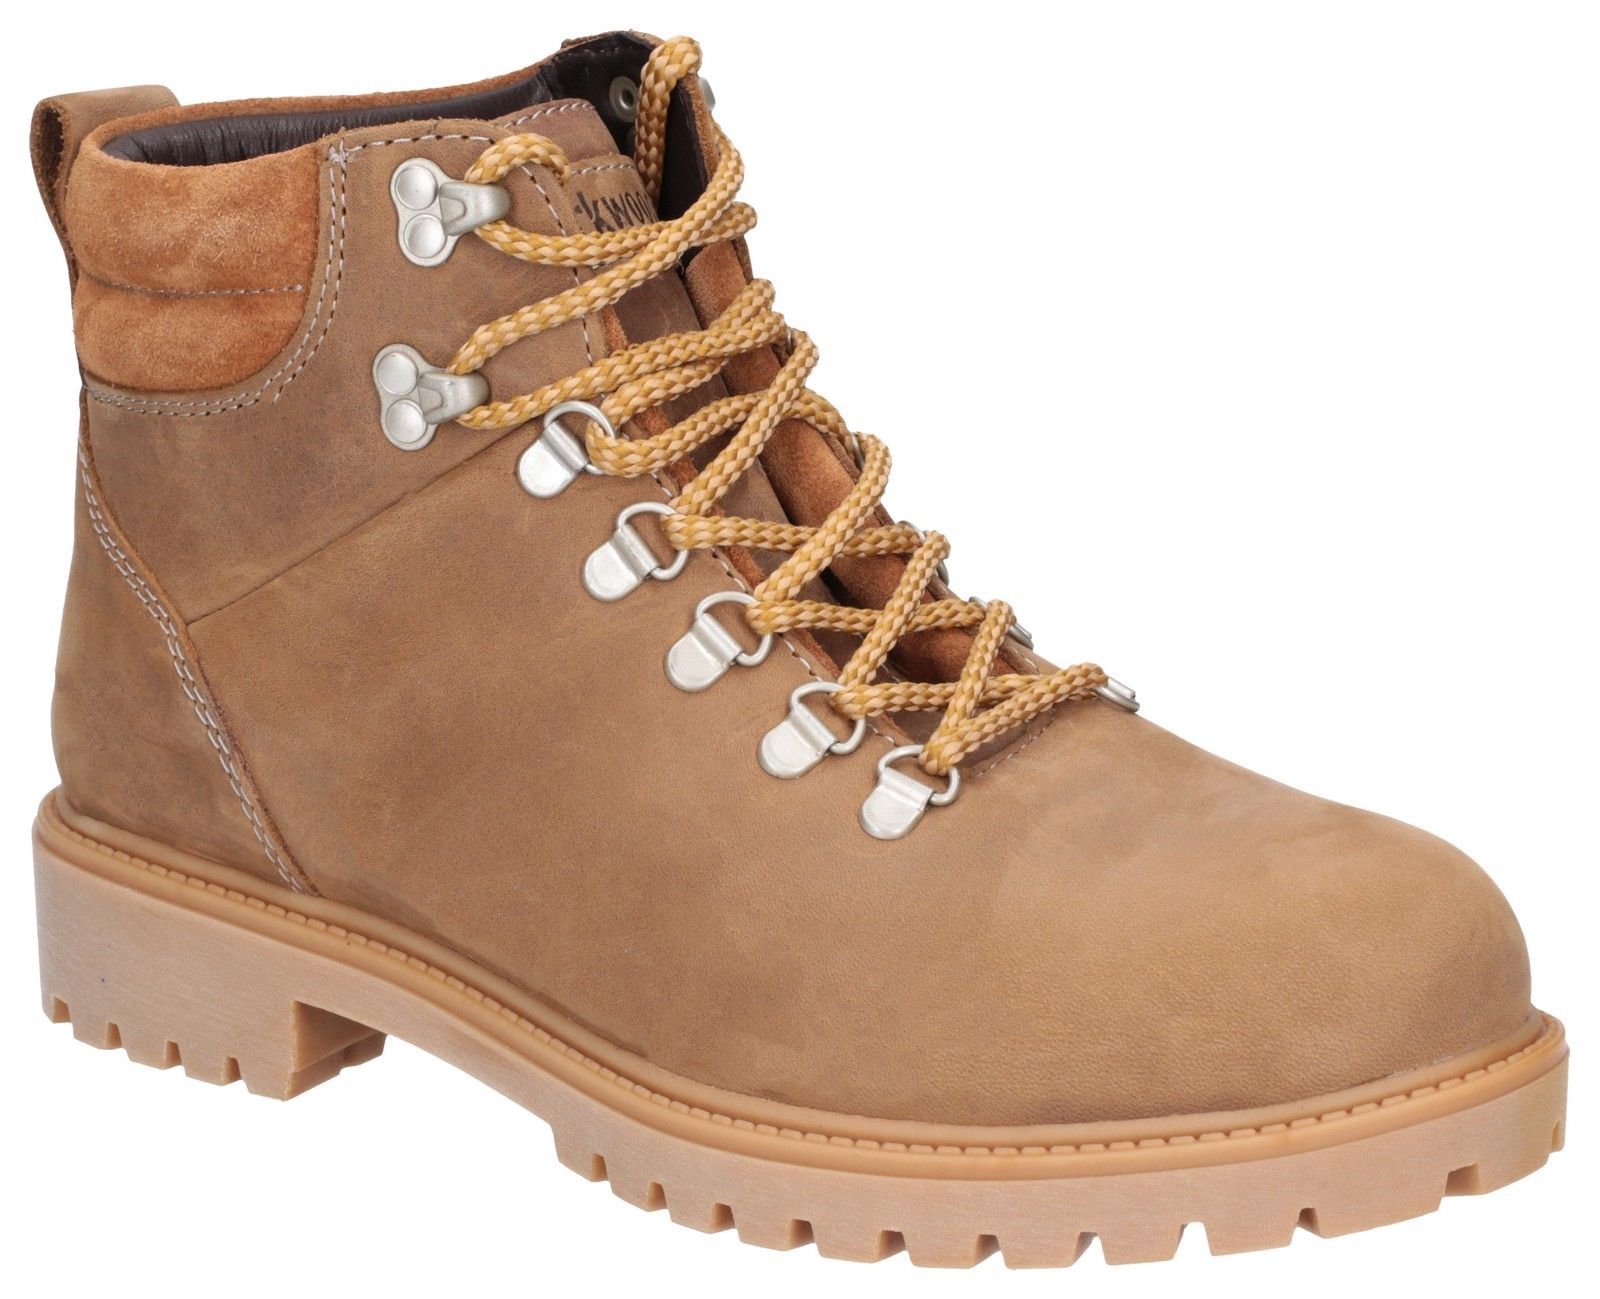 When the casual urban look of hiking boots meet the softness and flexibility, you get the ultimate in footwear. Featuring the memory foam and water-resistant technology our boots are perfect for long walking and travelling. Waterproof Casual Boot. 
Special Gel-Memory Foam footbed. 
Flexible and durable rubber outsole.